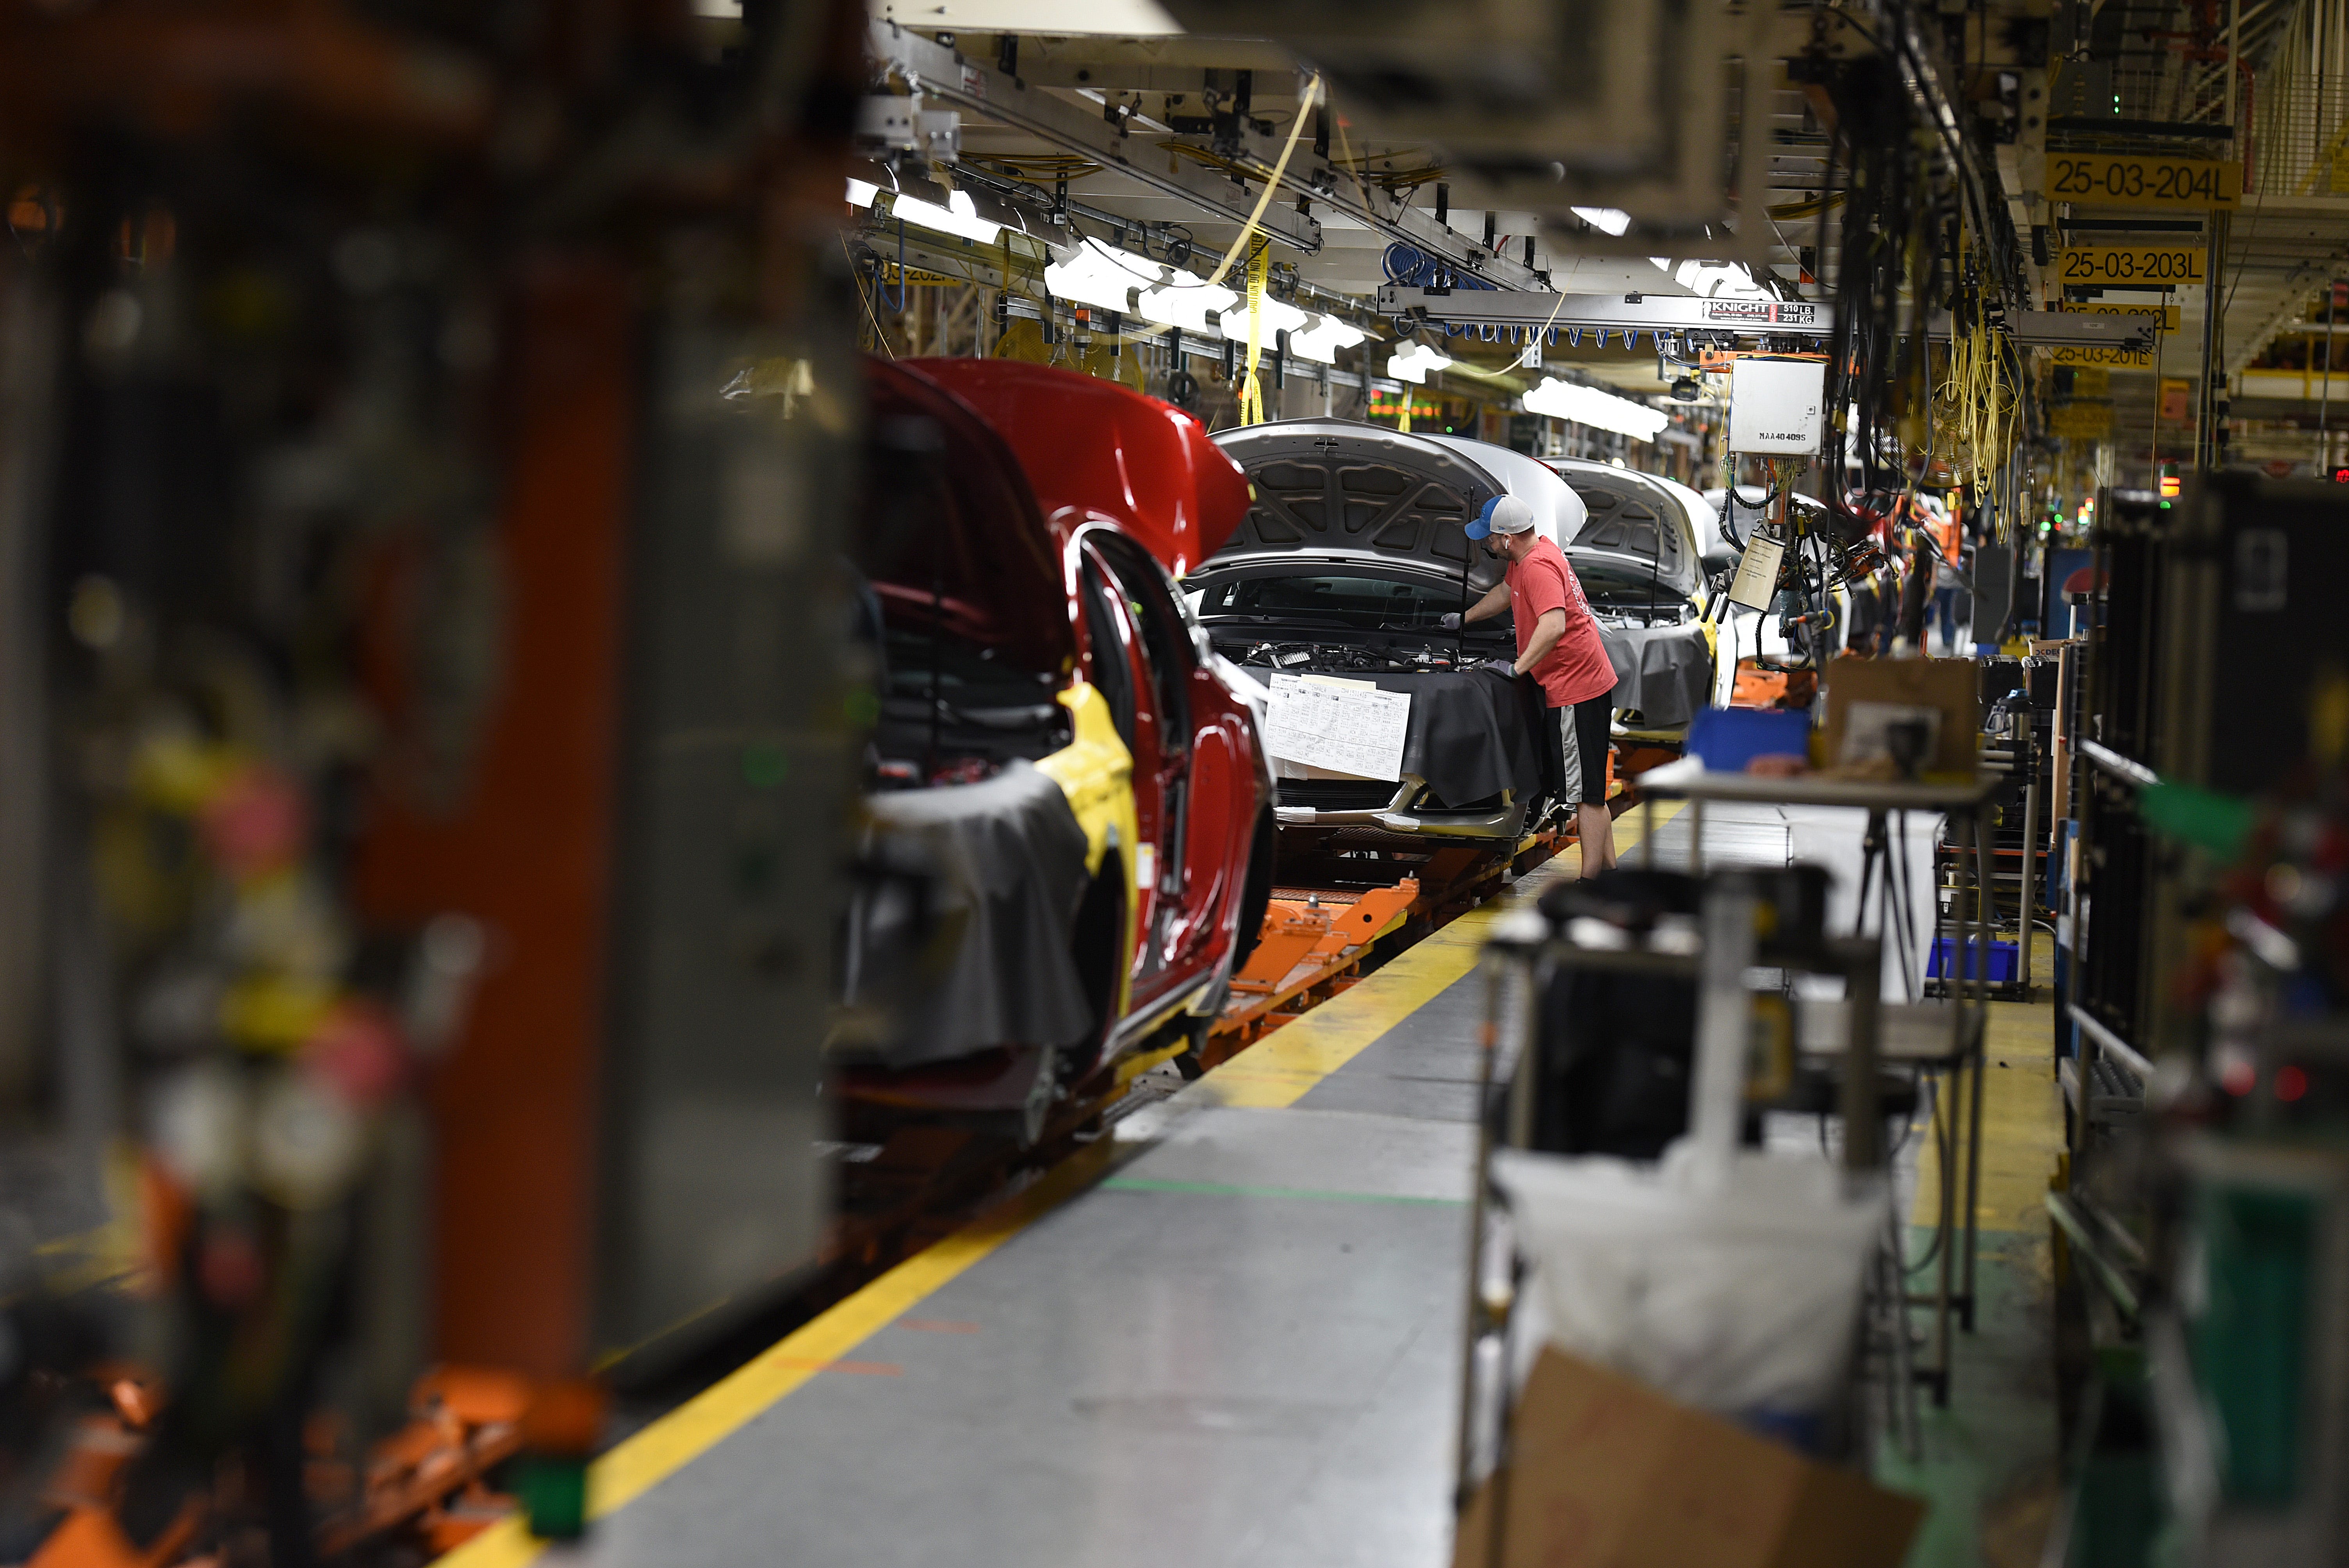 Assembly line workers at the General Motors Detroit-Hamtramck plant work on Chevrolet Impalas.